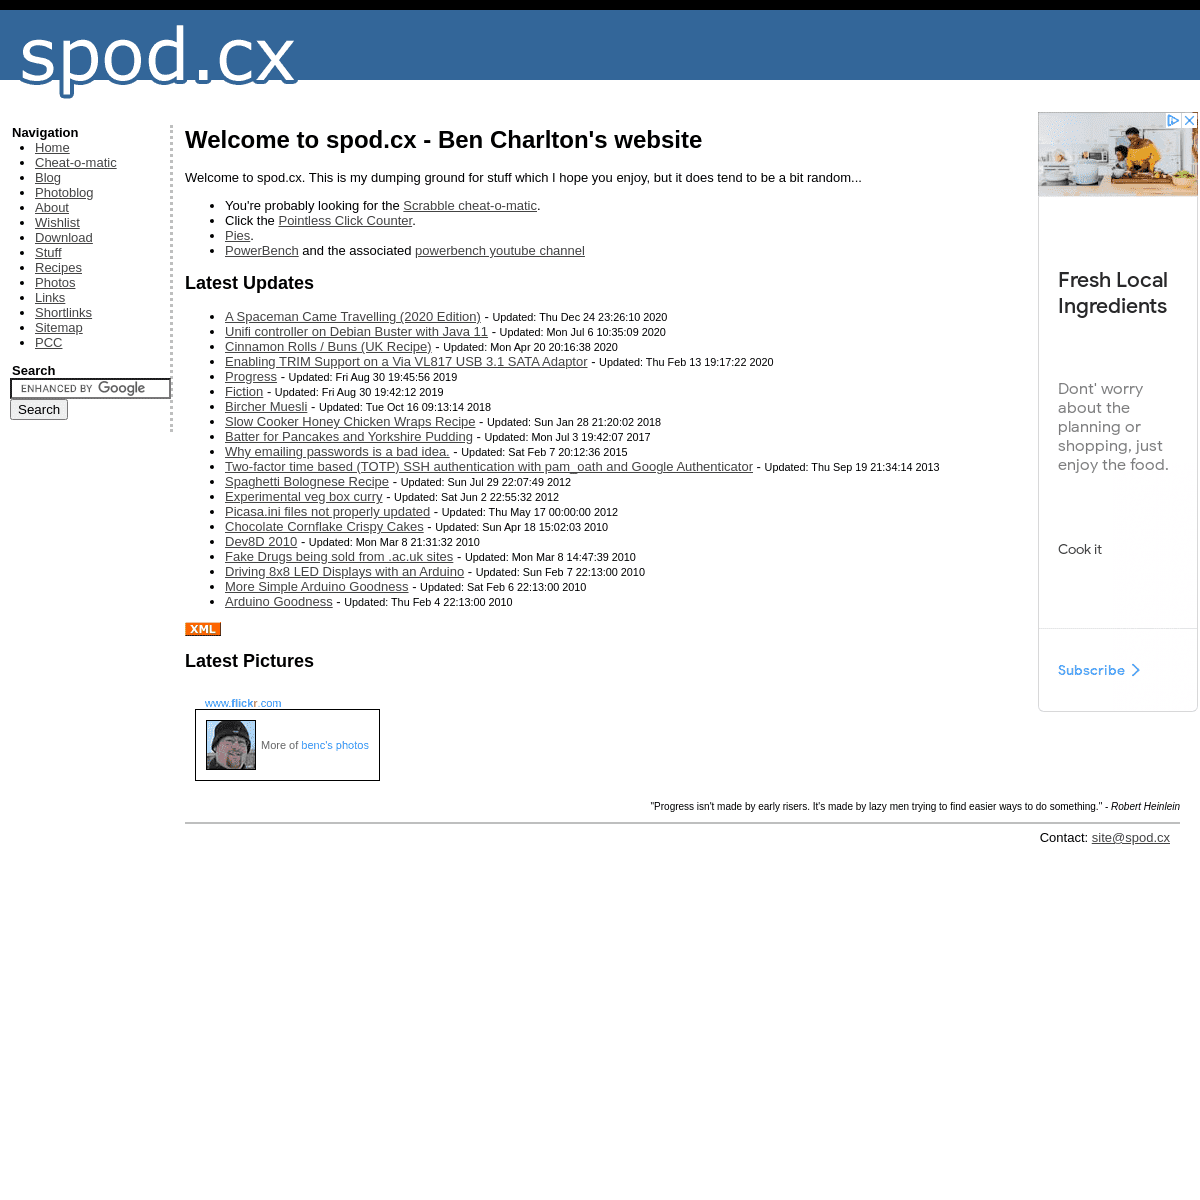 A complete backup of https://spod.cx